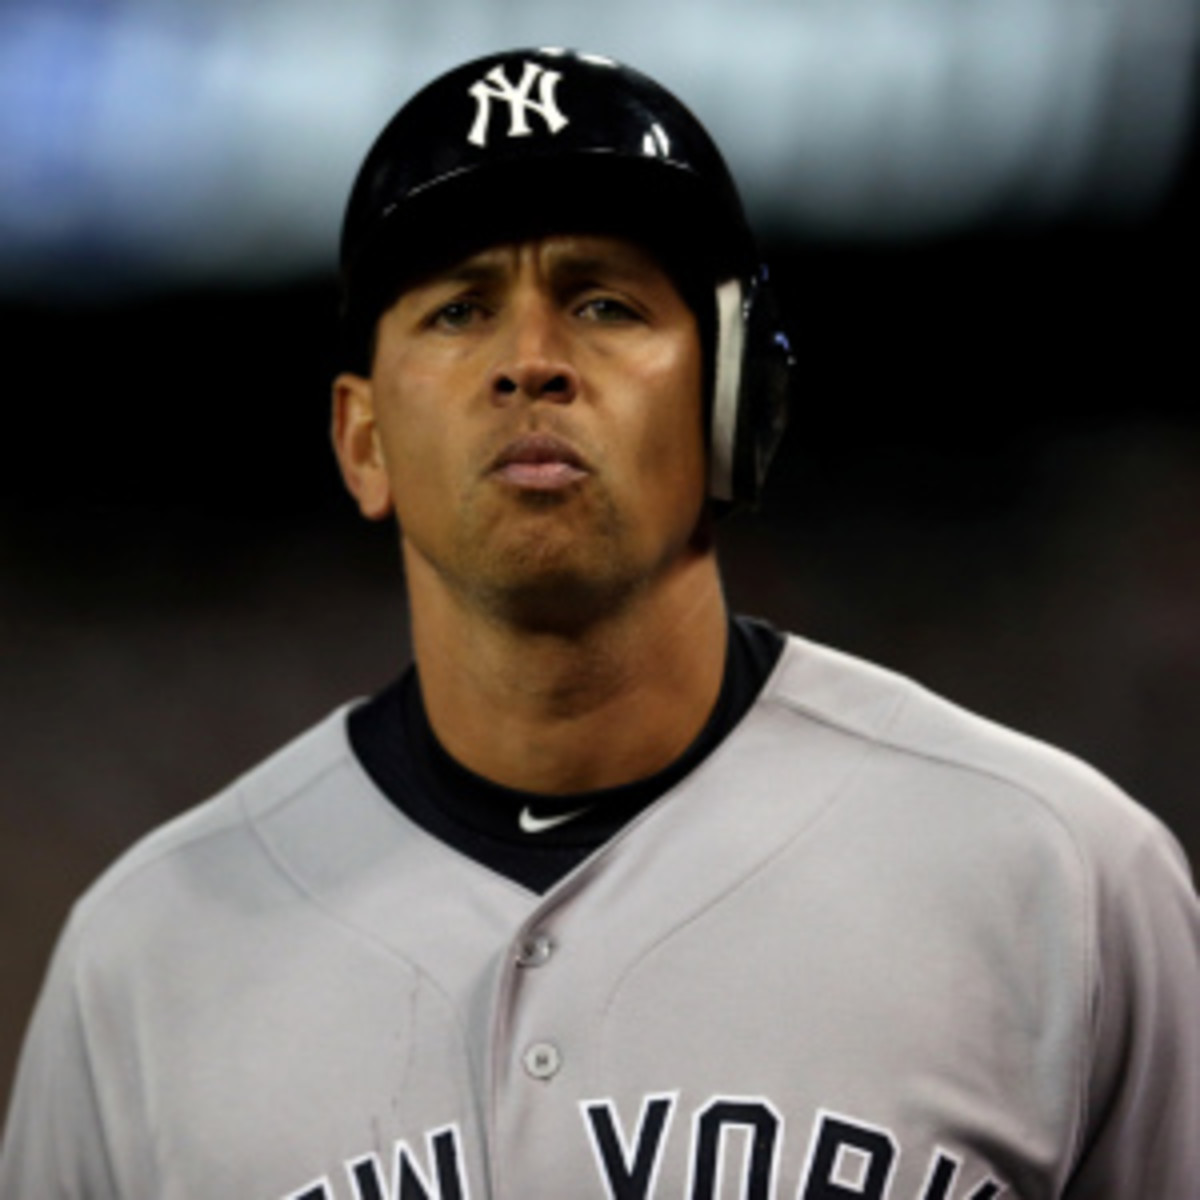 Alex Rodriguez's charity raised $403K in 2006 but donated only $5K